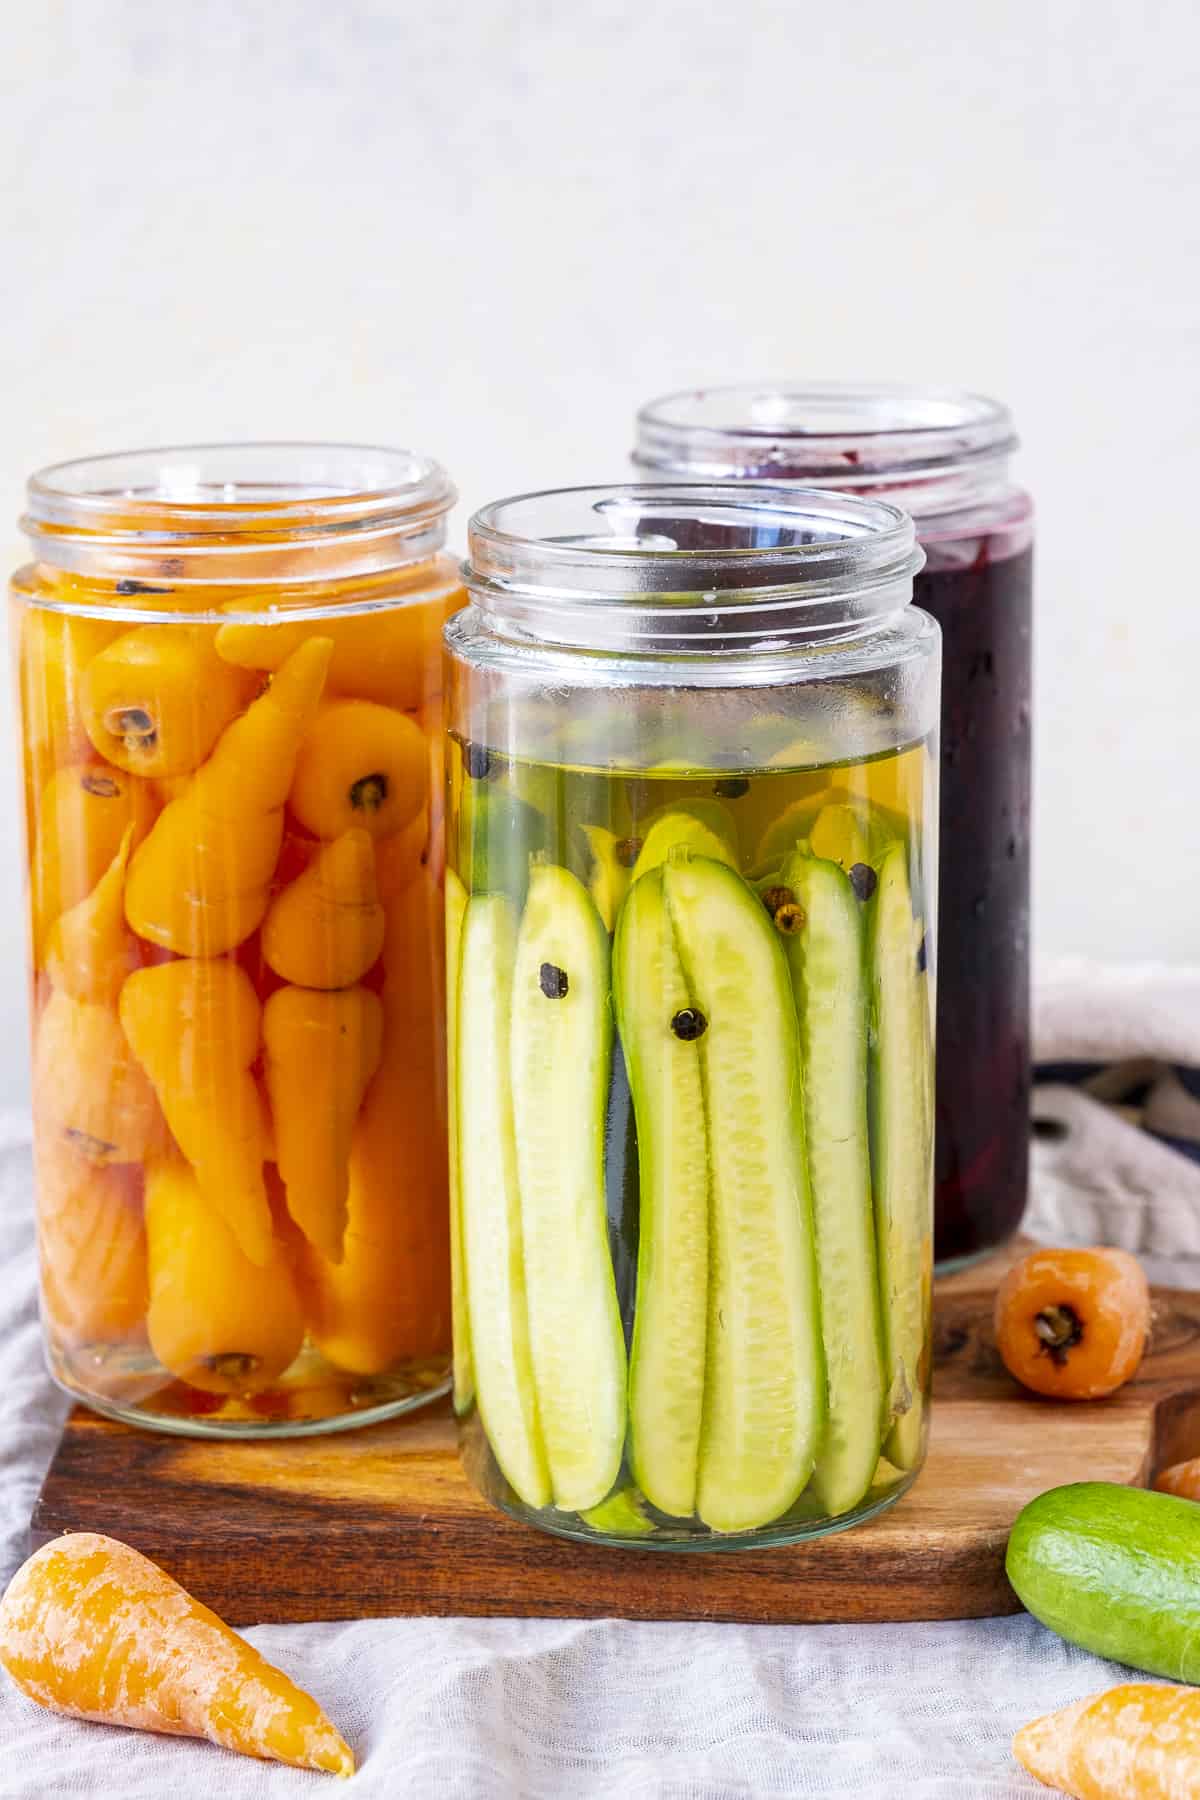 Pickled cucumbers, carrots and beets in jars on a wooden board.